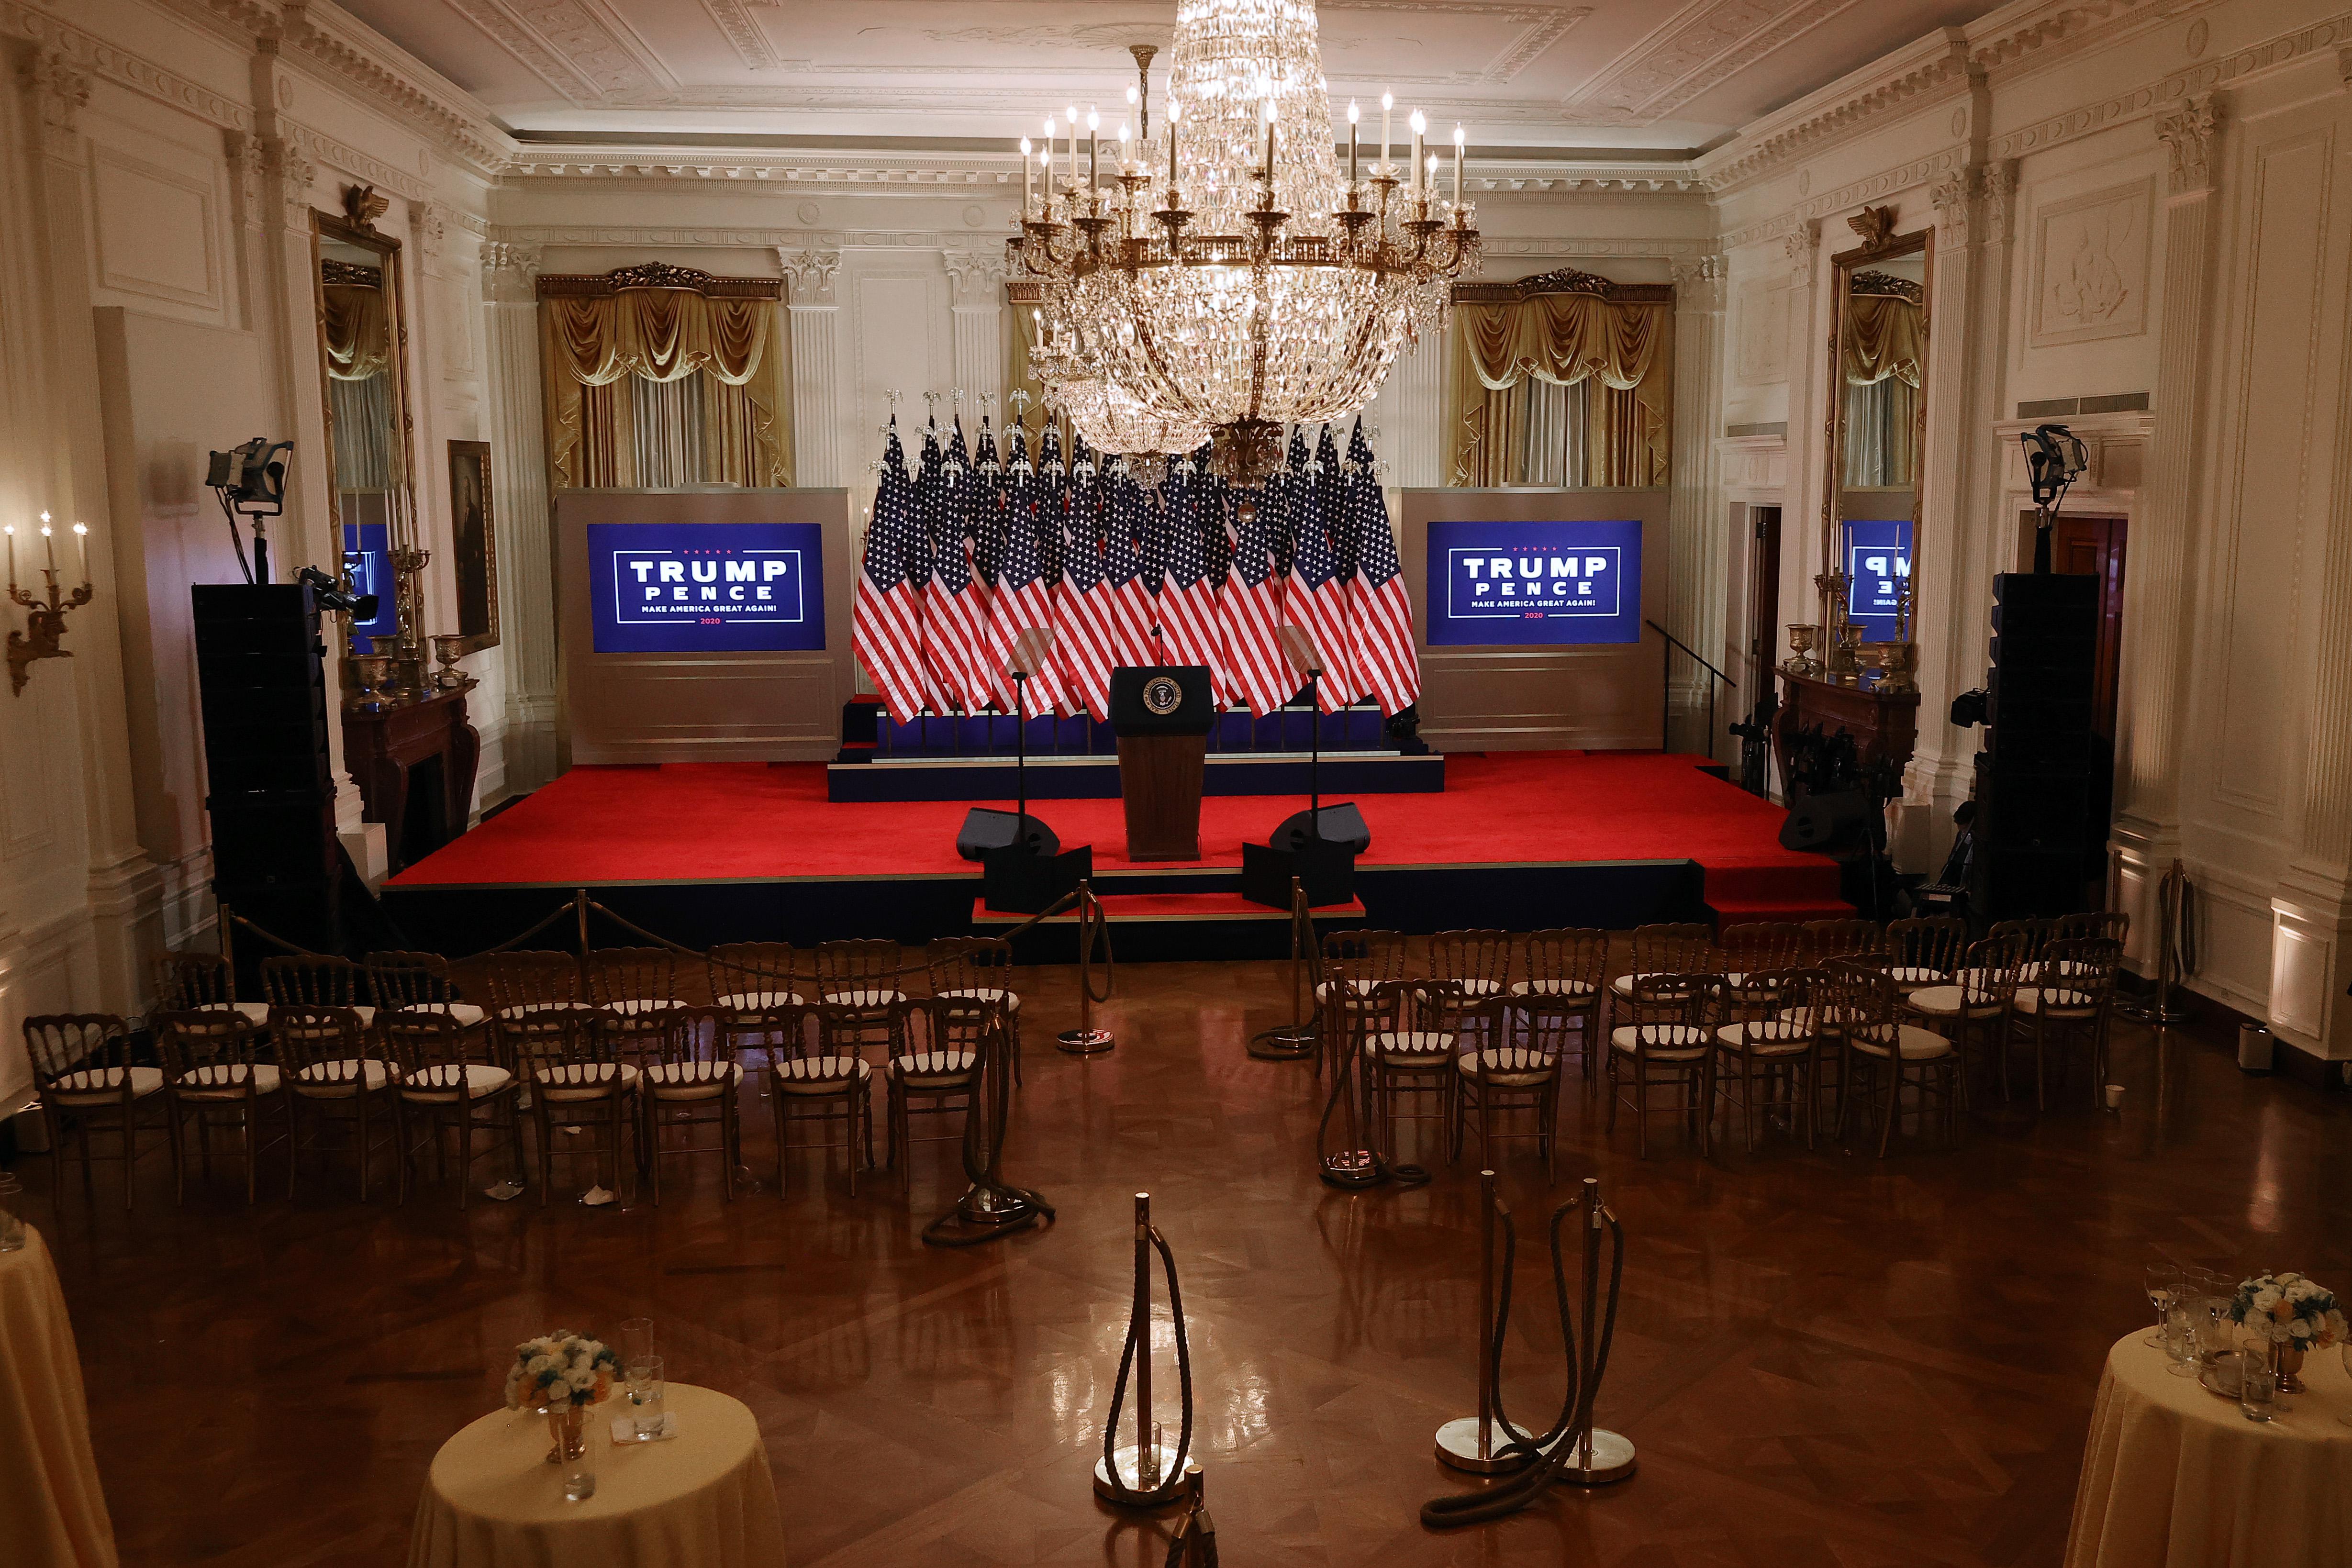 A room empty of people, with rows  of vacant chairs facing a presidential lectern on a red-carped stage, backed by a solid mass of American flags on flagpoles and flanked by Trump-Pence logos on screens. 